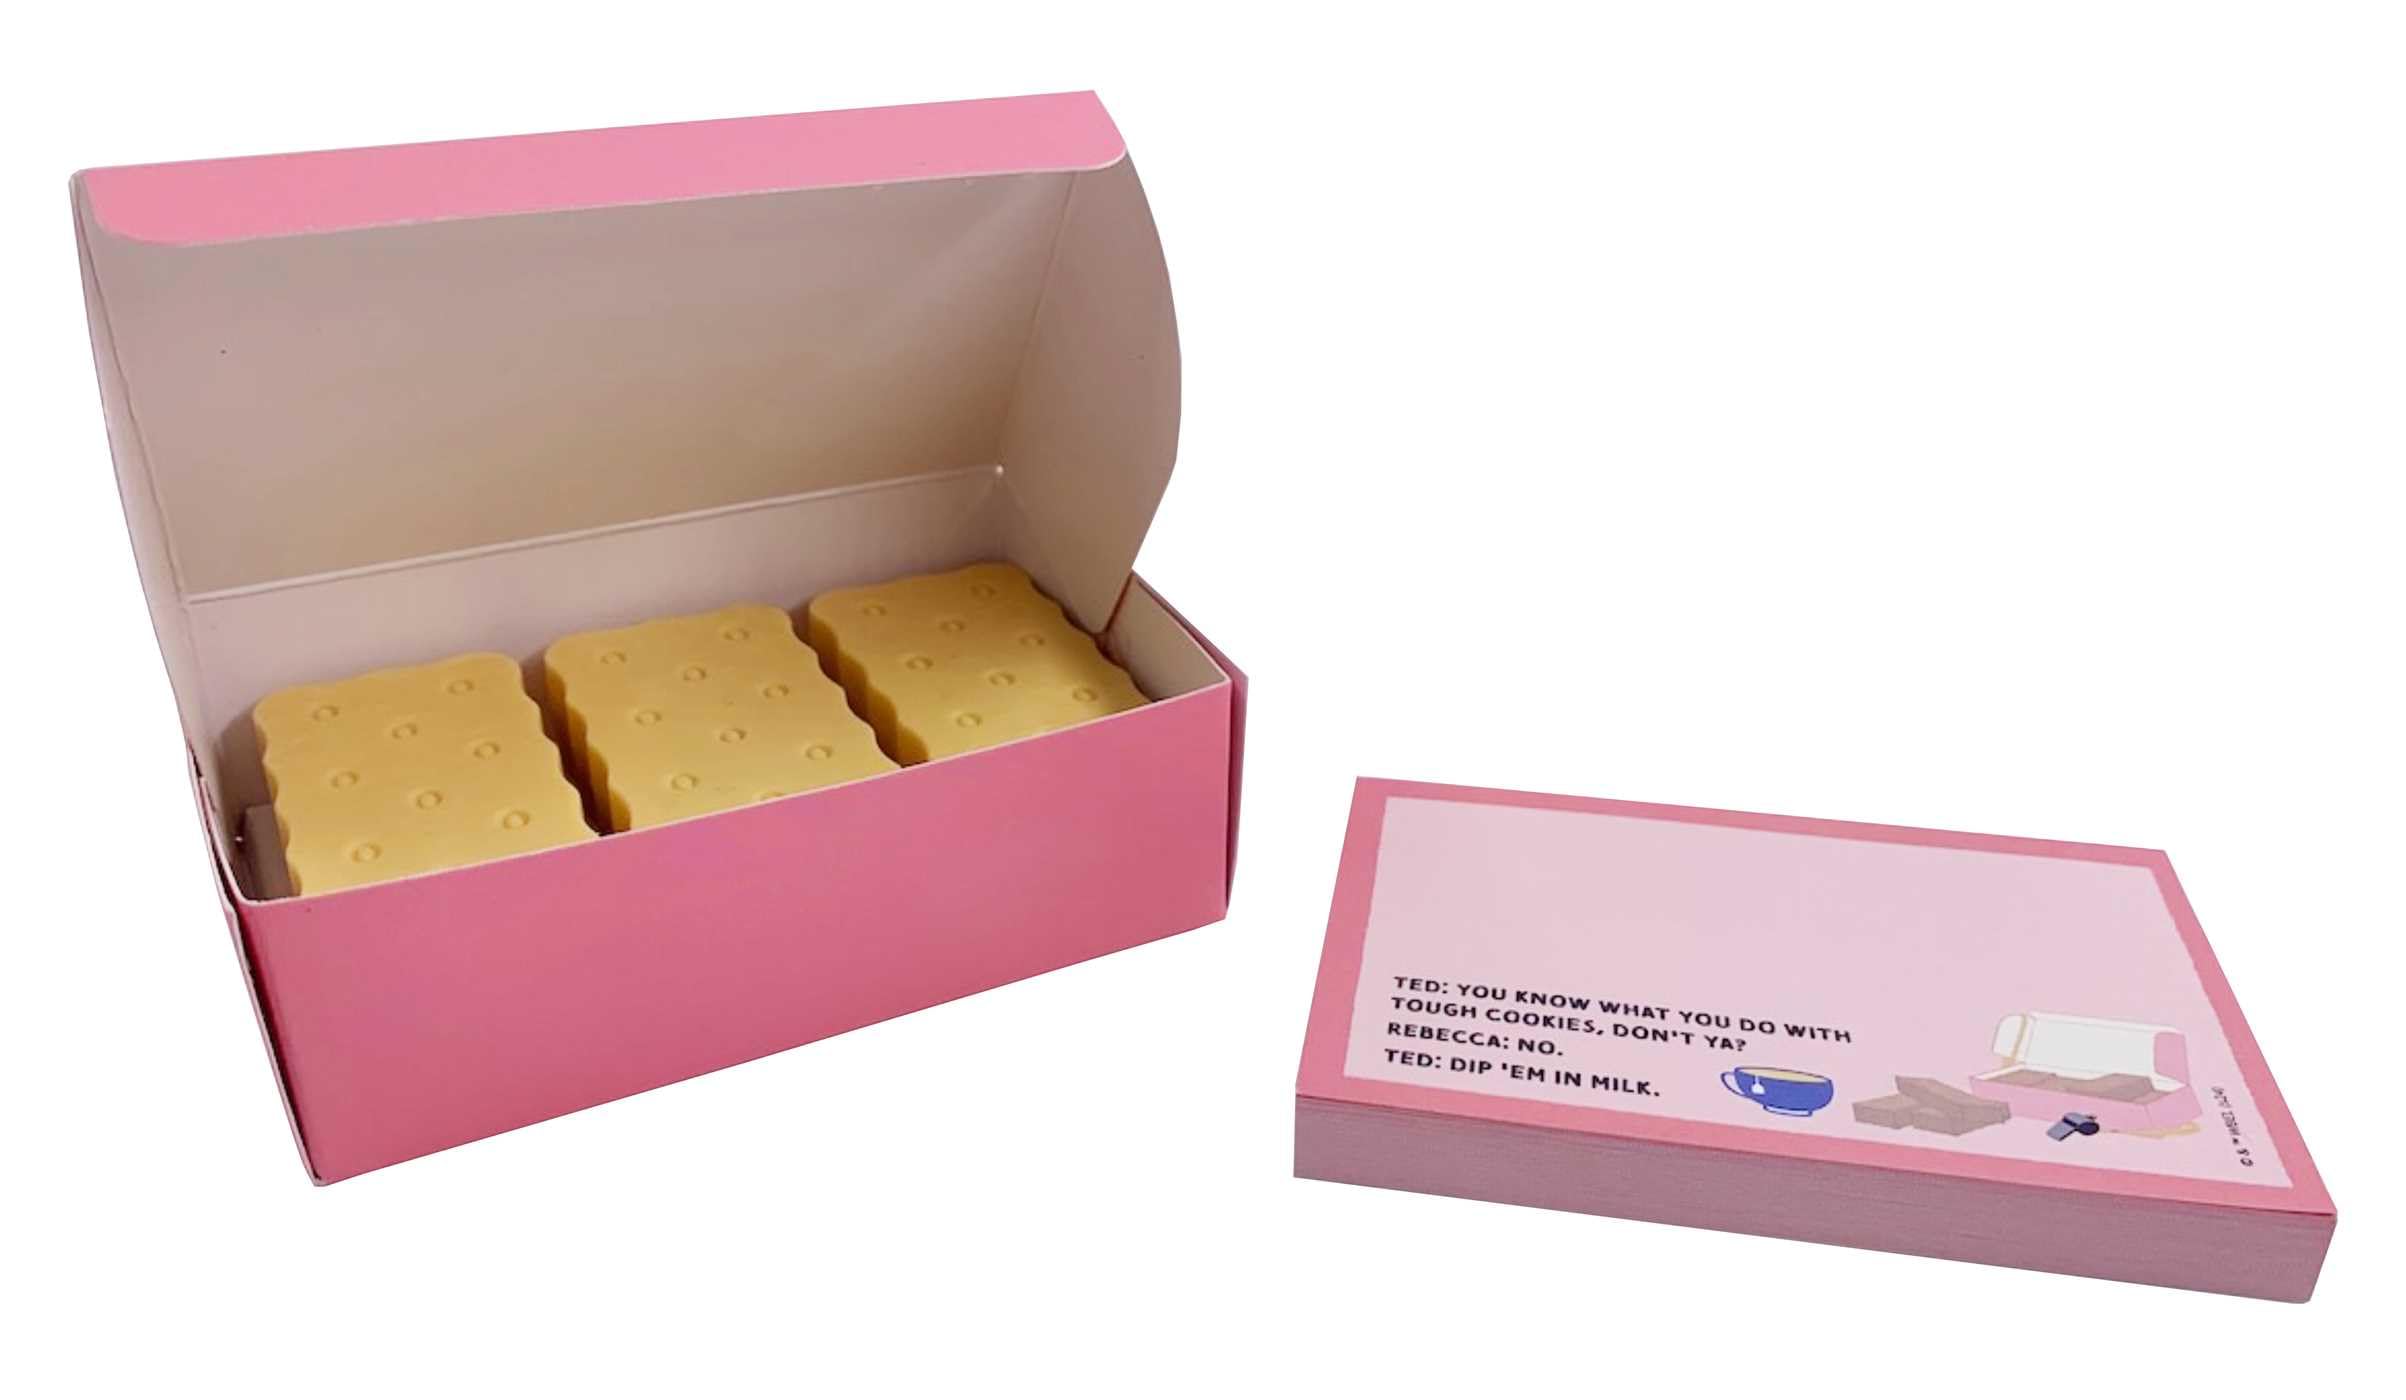 Ted Lasso: Biscuits With The Boss Scented Eraser & Sticky Notepad Set